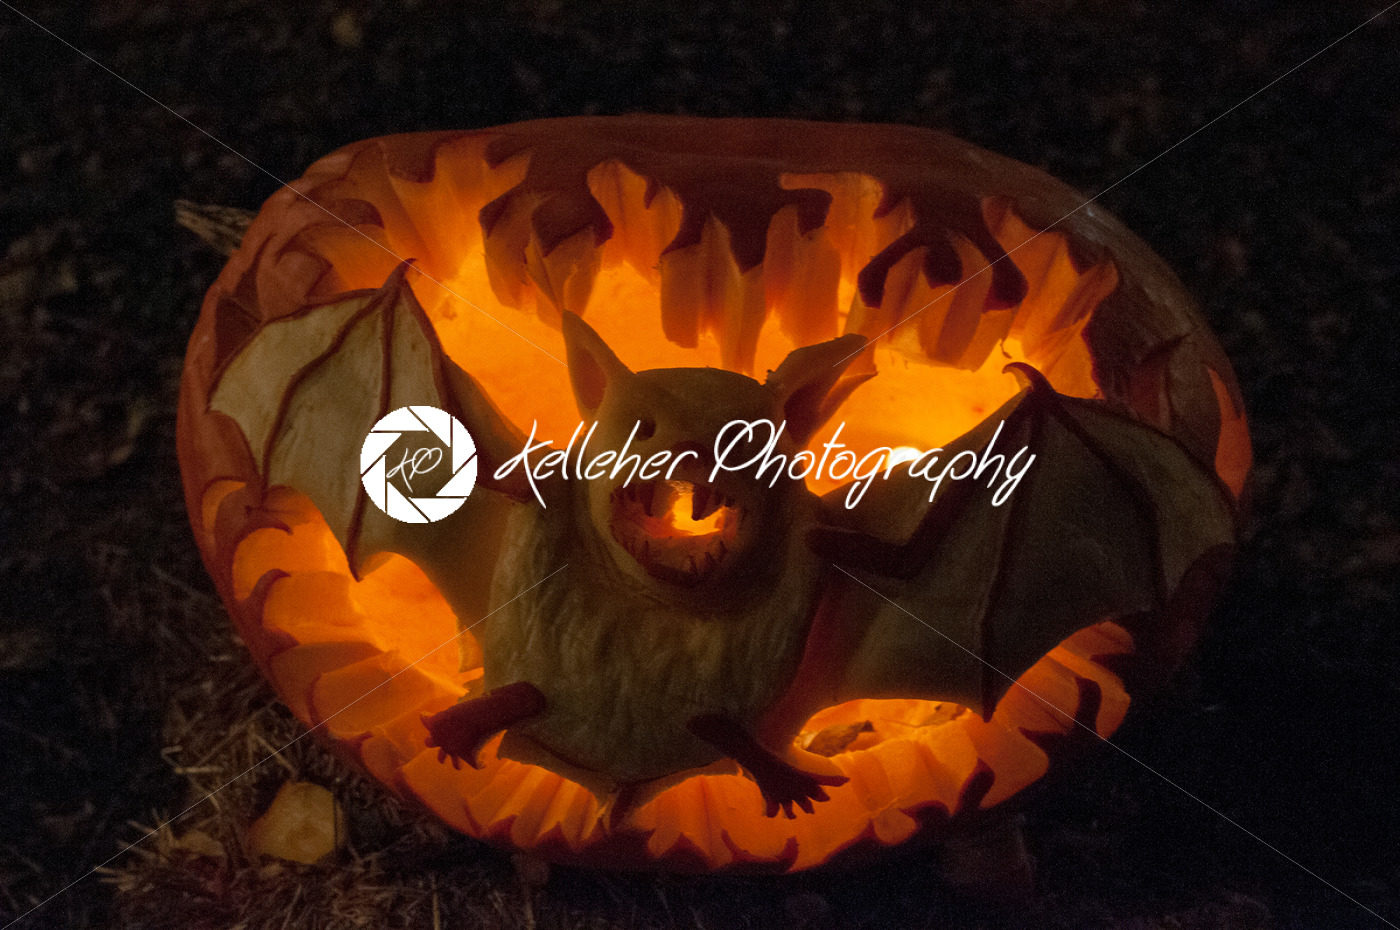 CHADDS FORD, PA – OCTOBER 26: Bat Pumpkin at The Great Pumpkin Carve carving contest on October 26, 2013 - Kelleher Photography Store